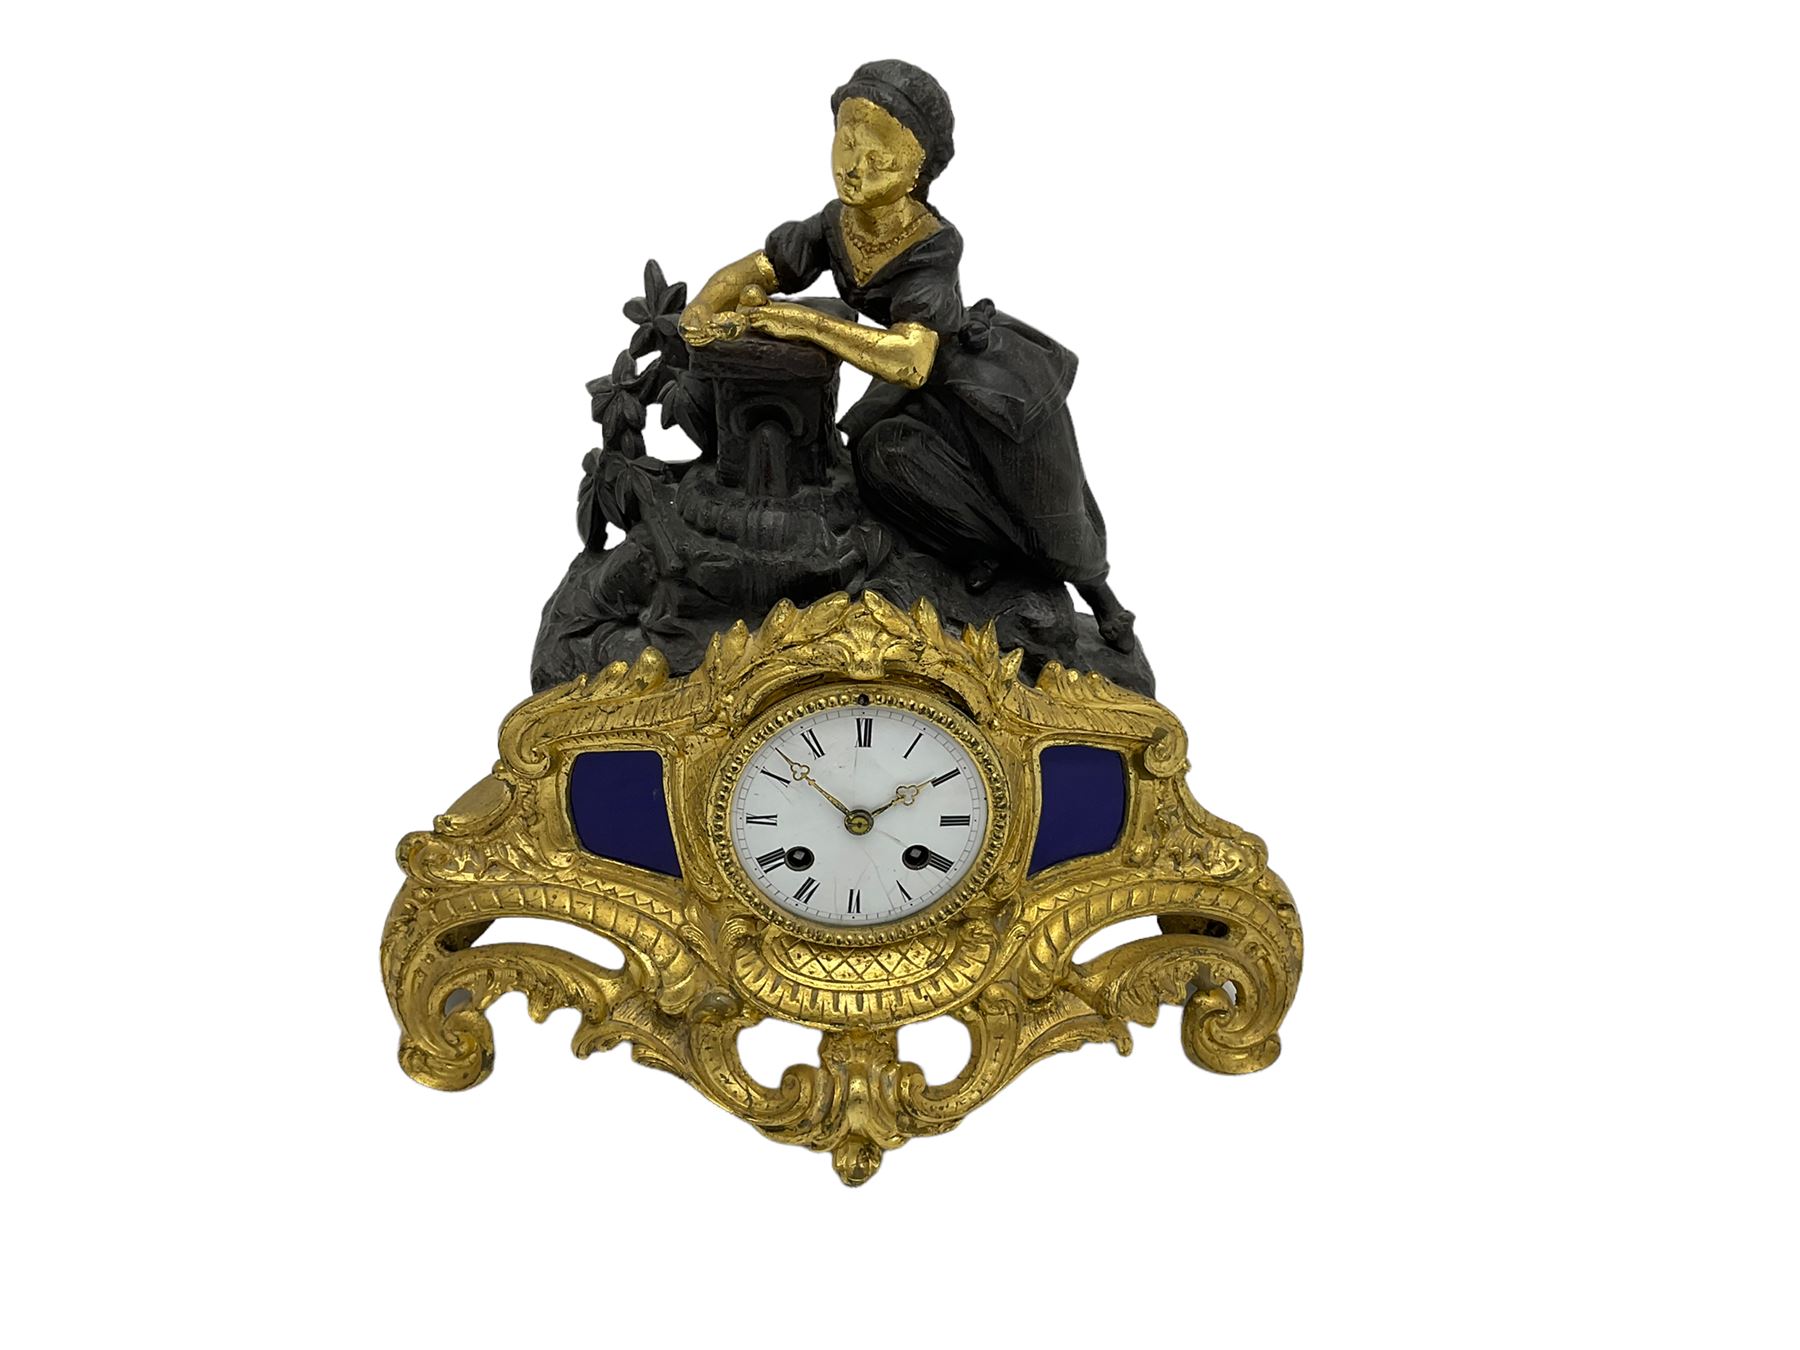 Early 19th century c 1820 French mantle clock in a spelter and gilt case